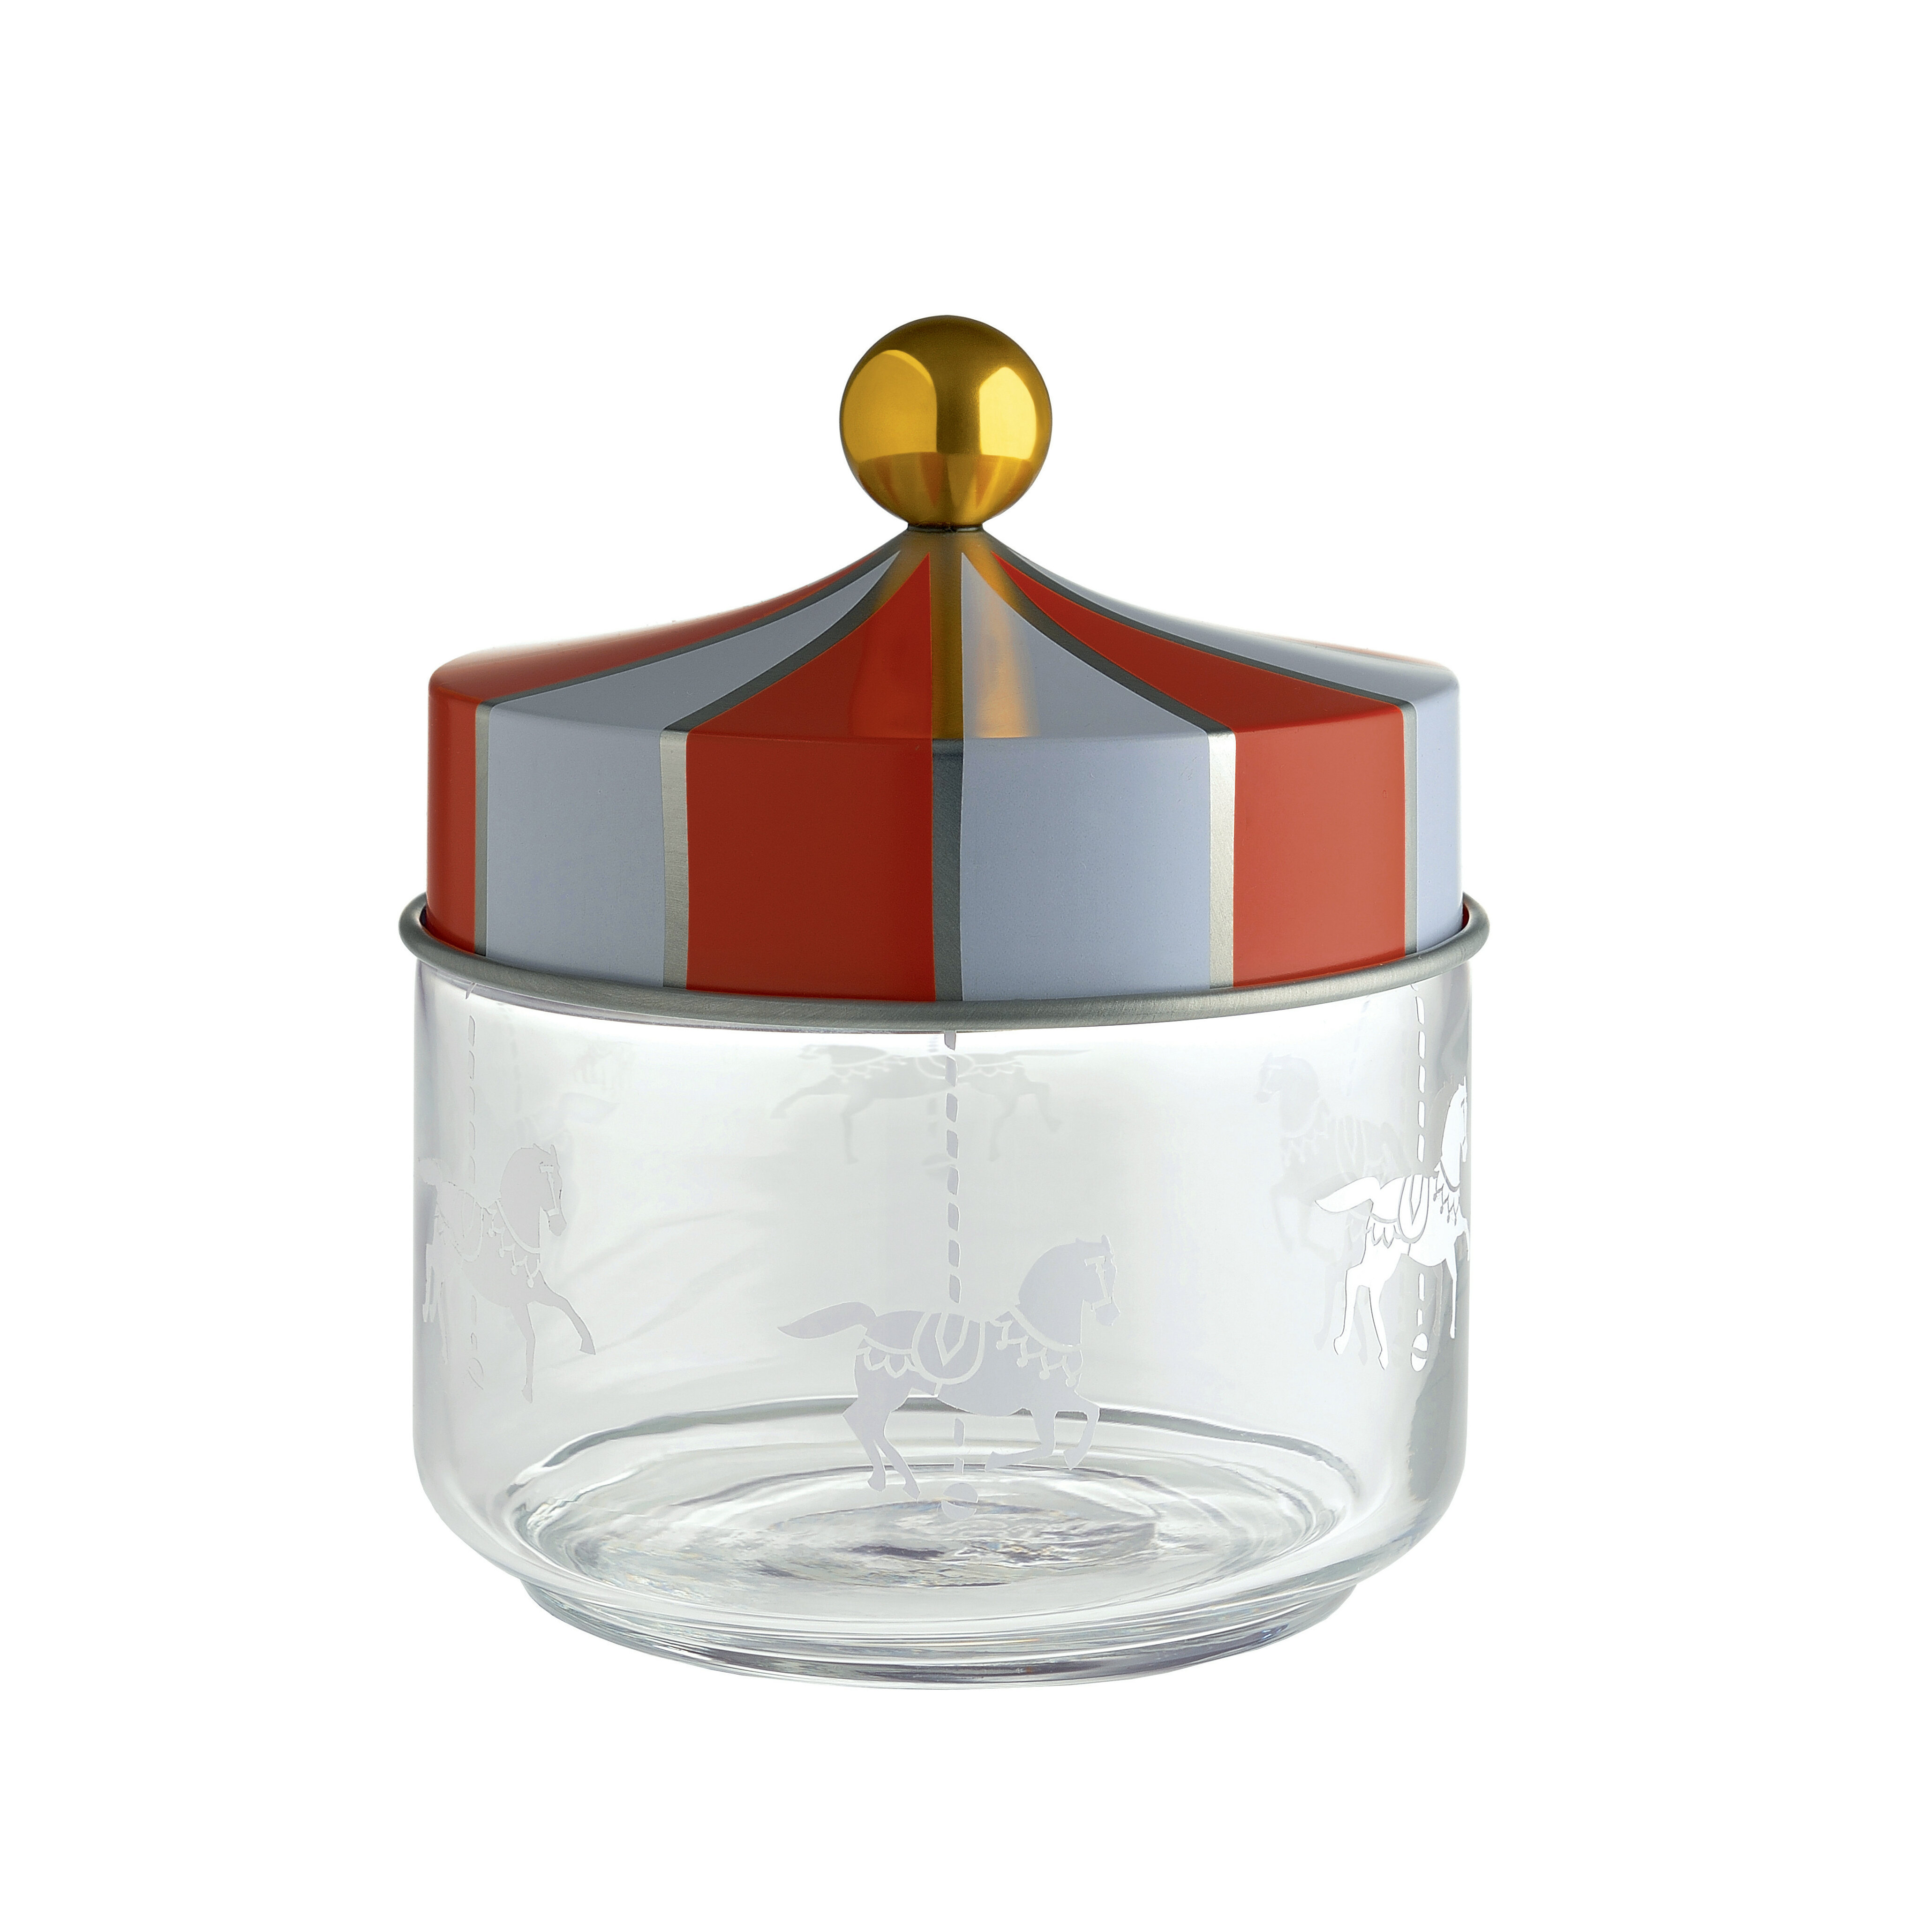 Alessi / Circus by Marcel Wanders